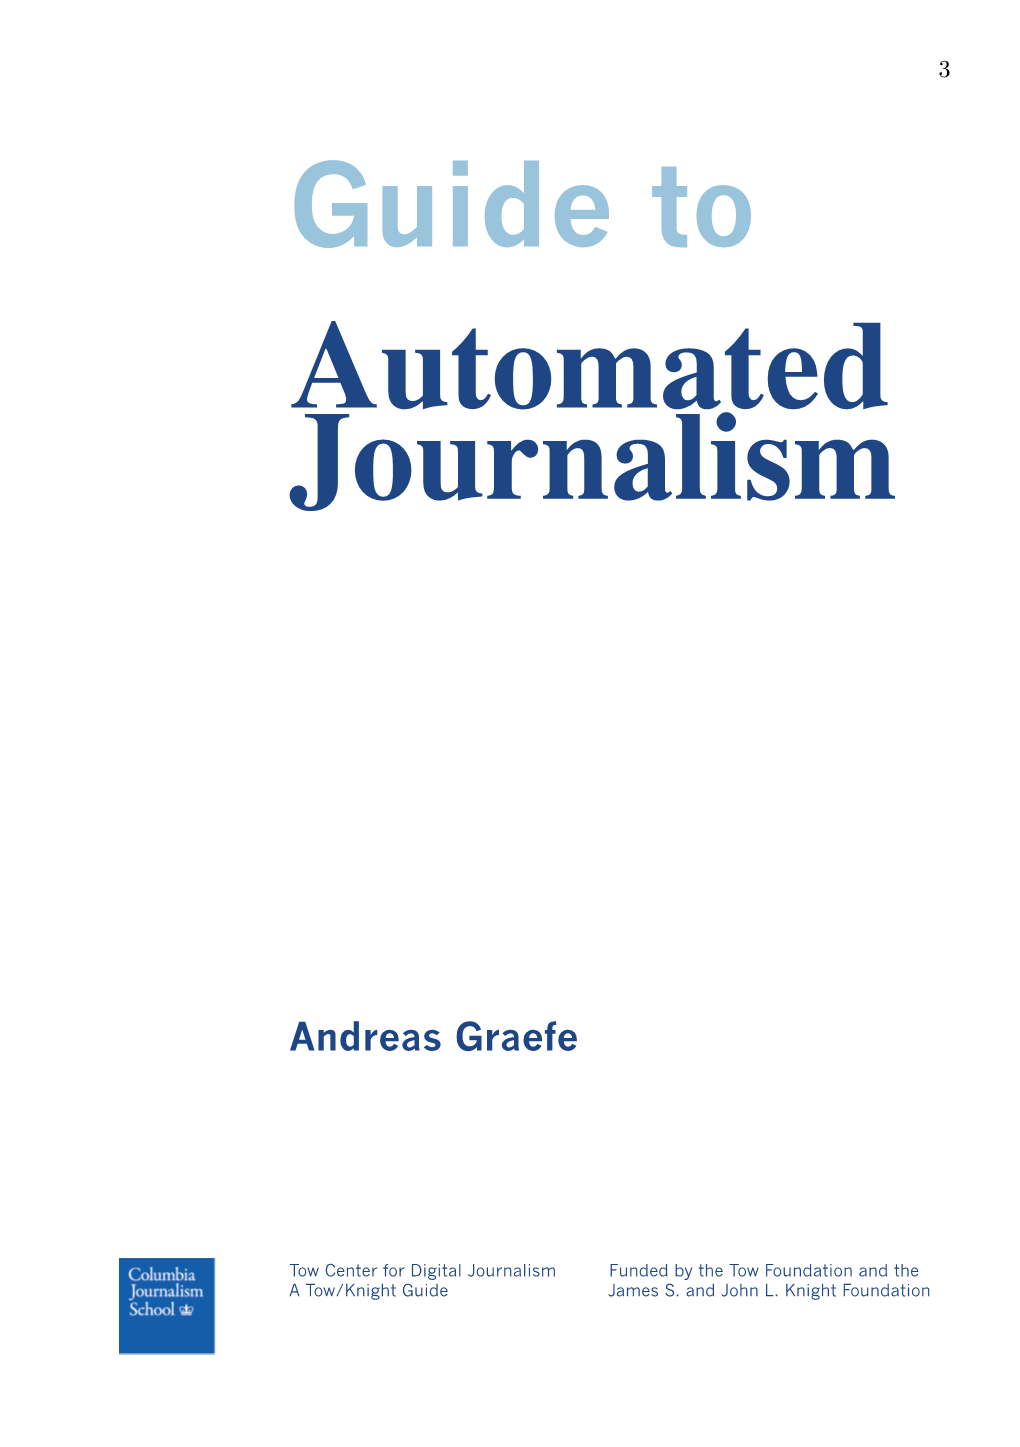 Guide to Automated Journalism